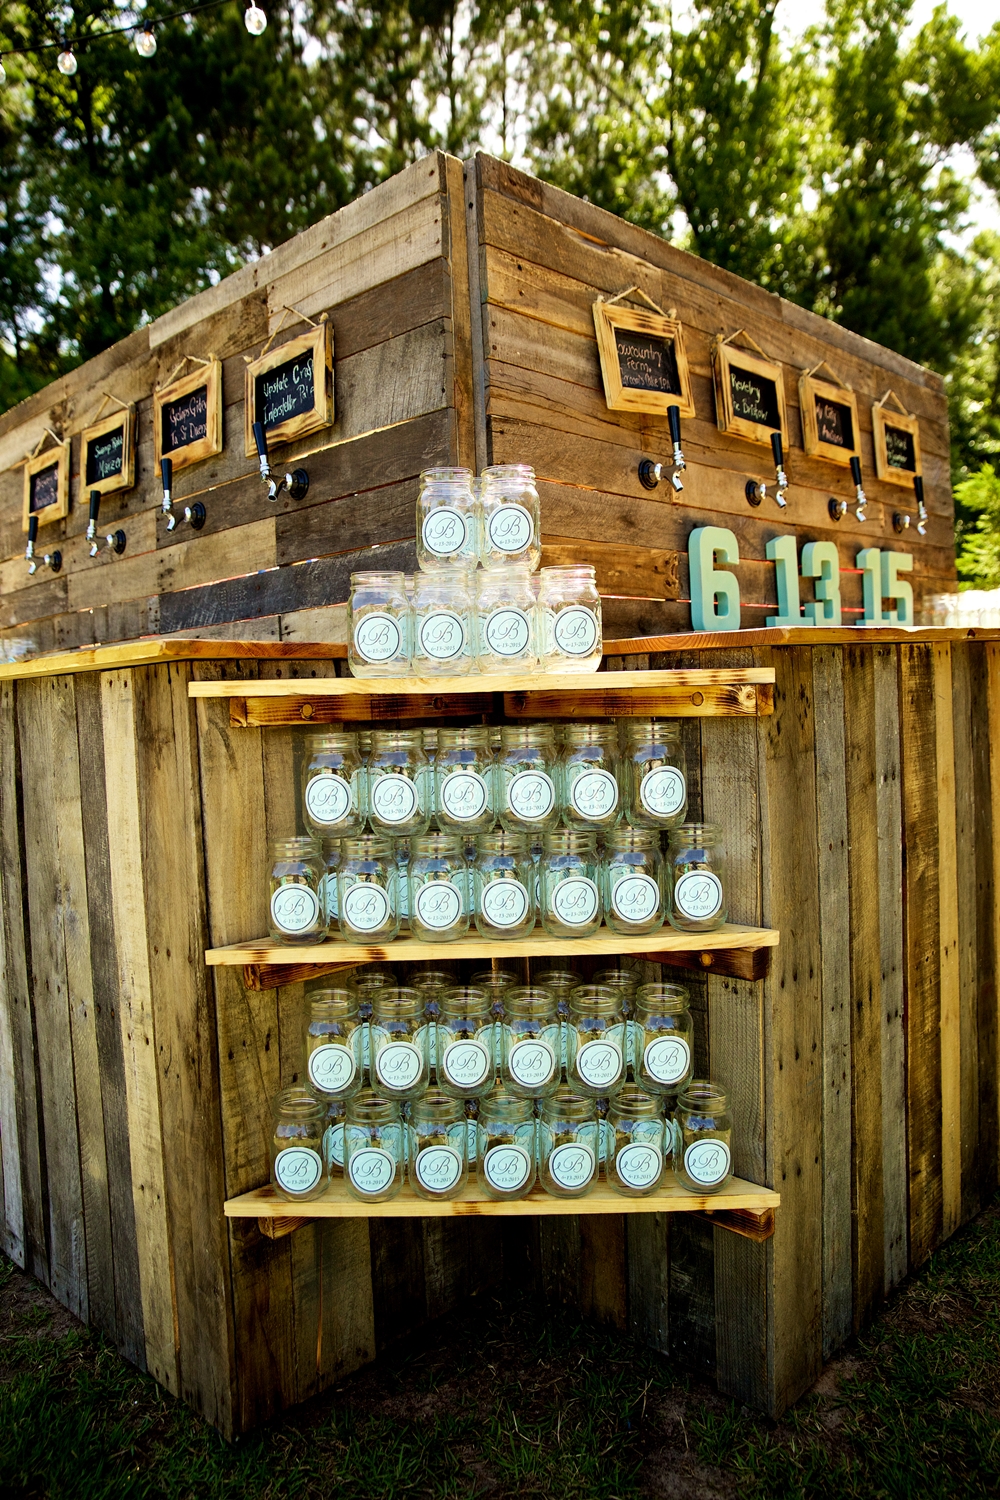 Beers on Tap from Revelry Brewing Co. at Christine Kohler + Brook Bristow's Summer Old Wide Awake Plantation wedding in Charleston, Sc